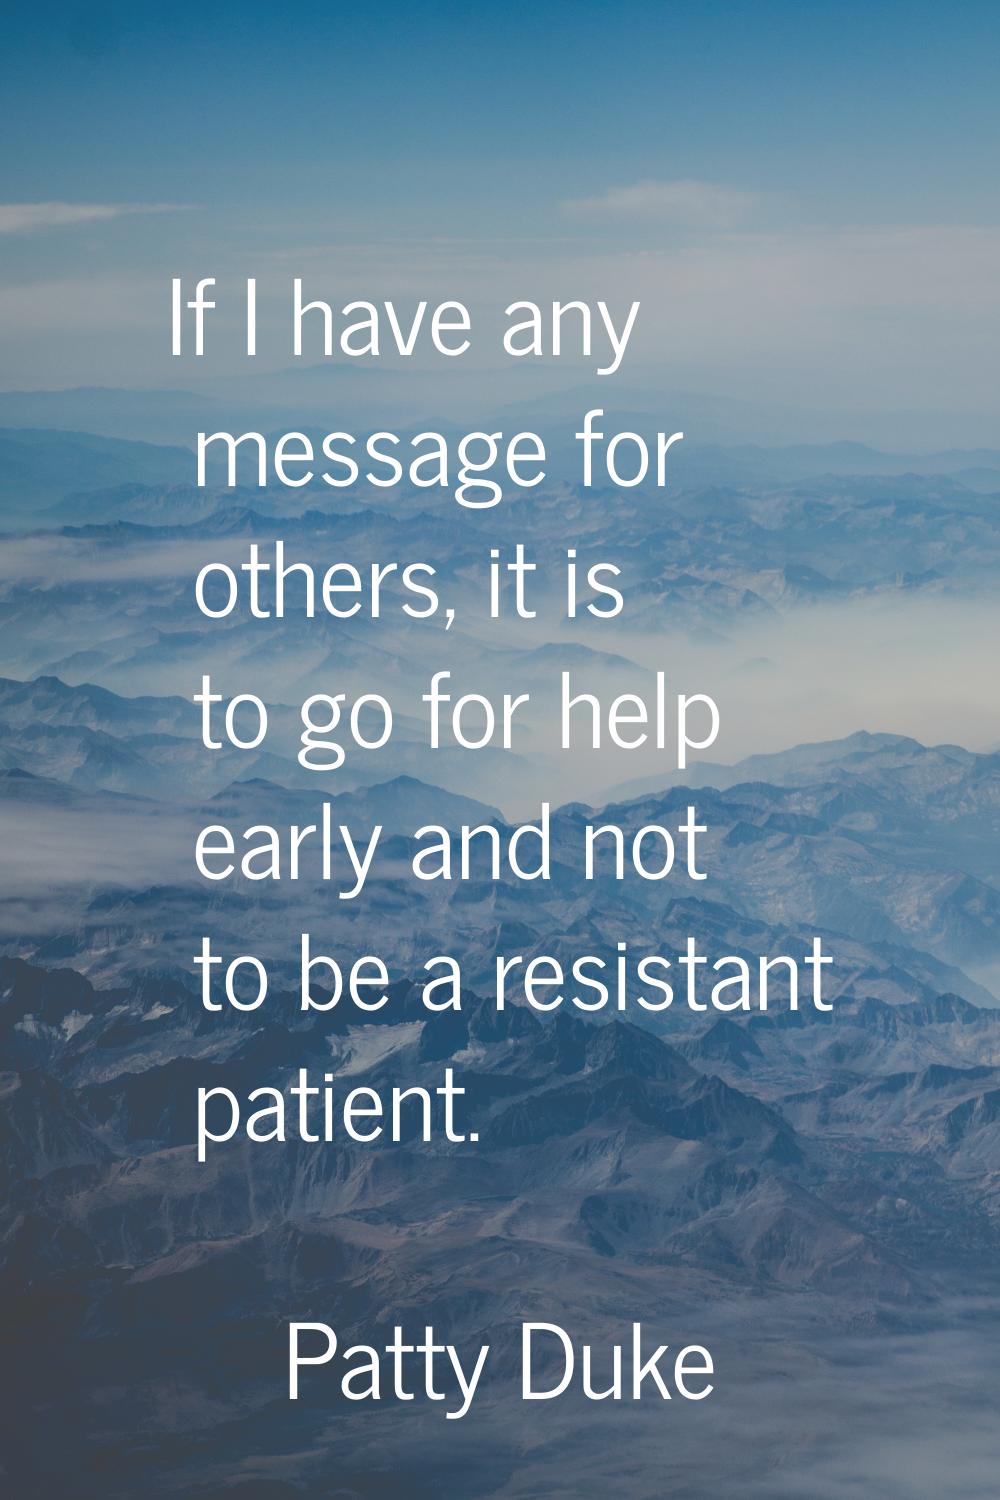 If I have any message for others, it is to go for help early and not to be a resistant patient.